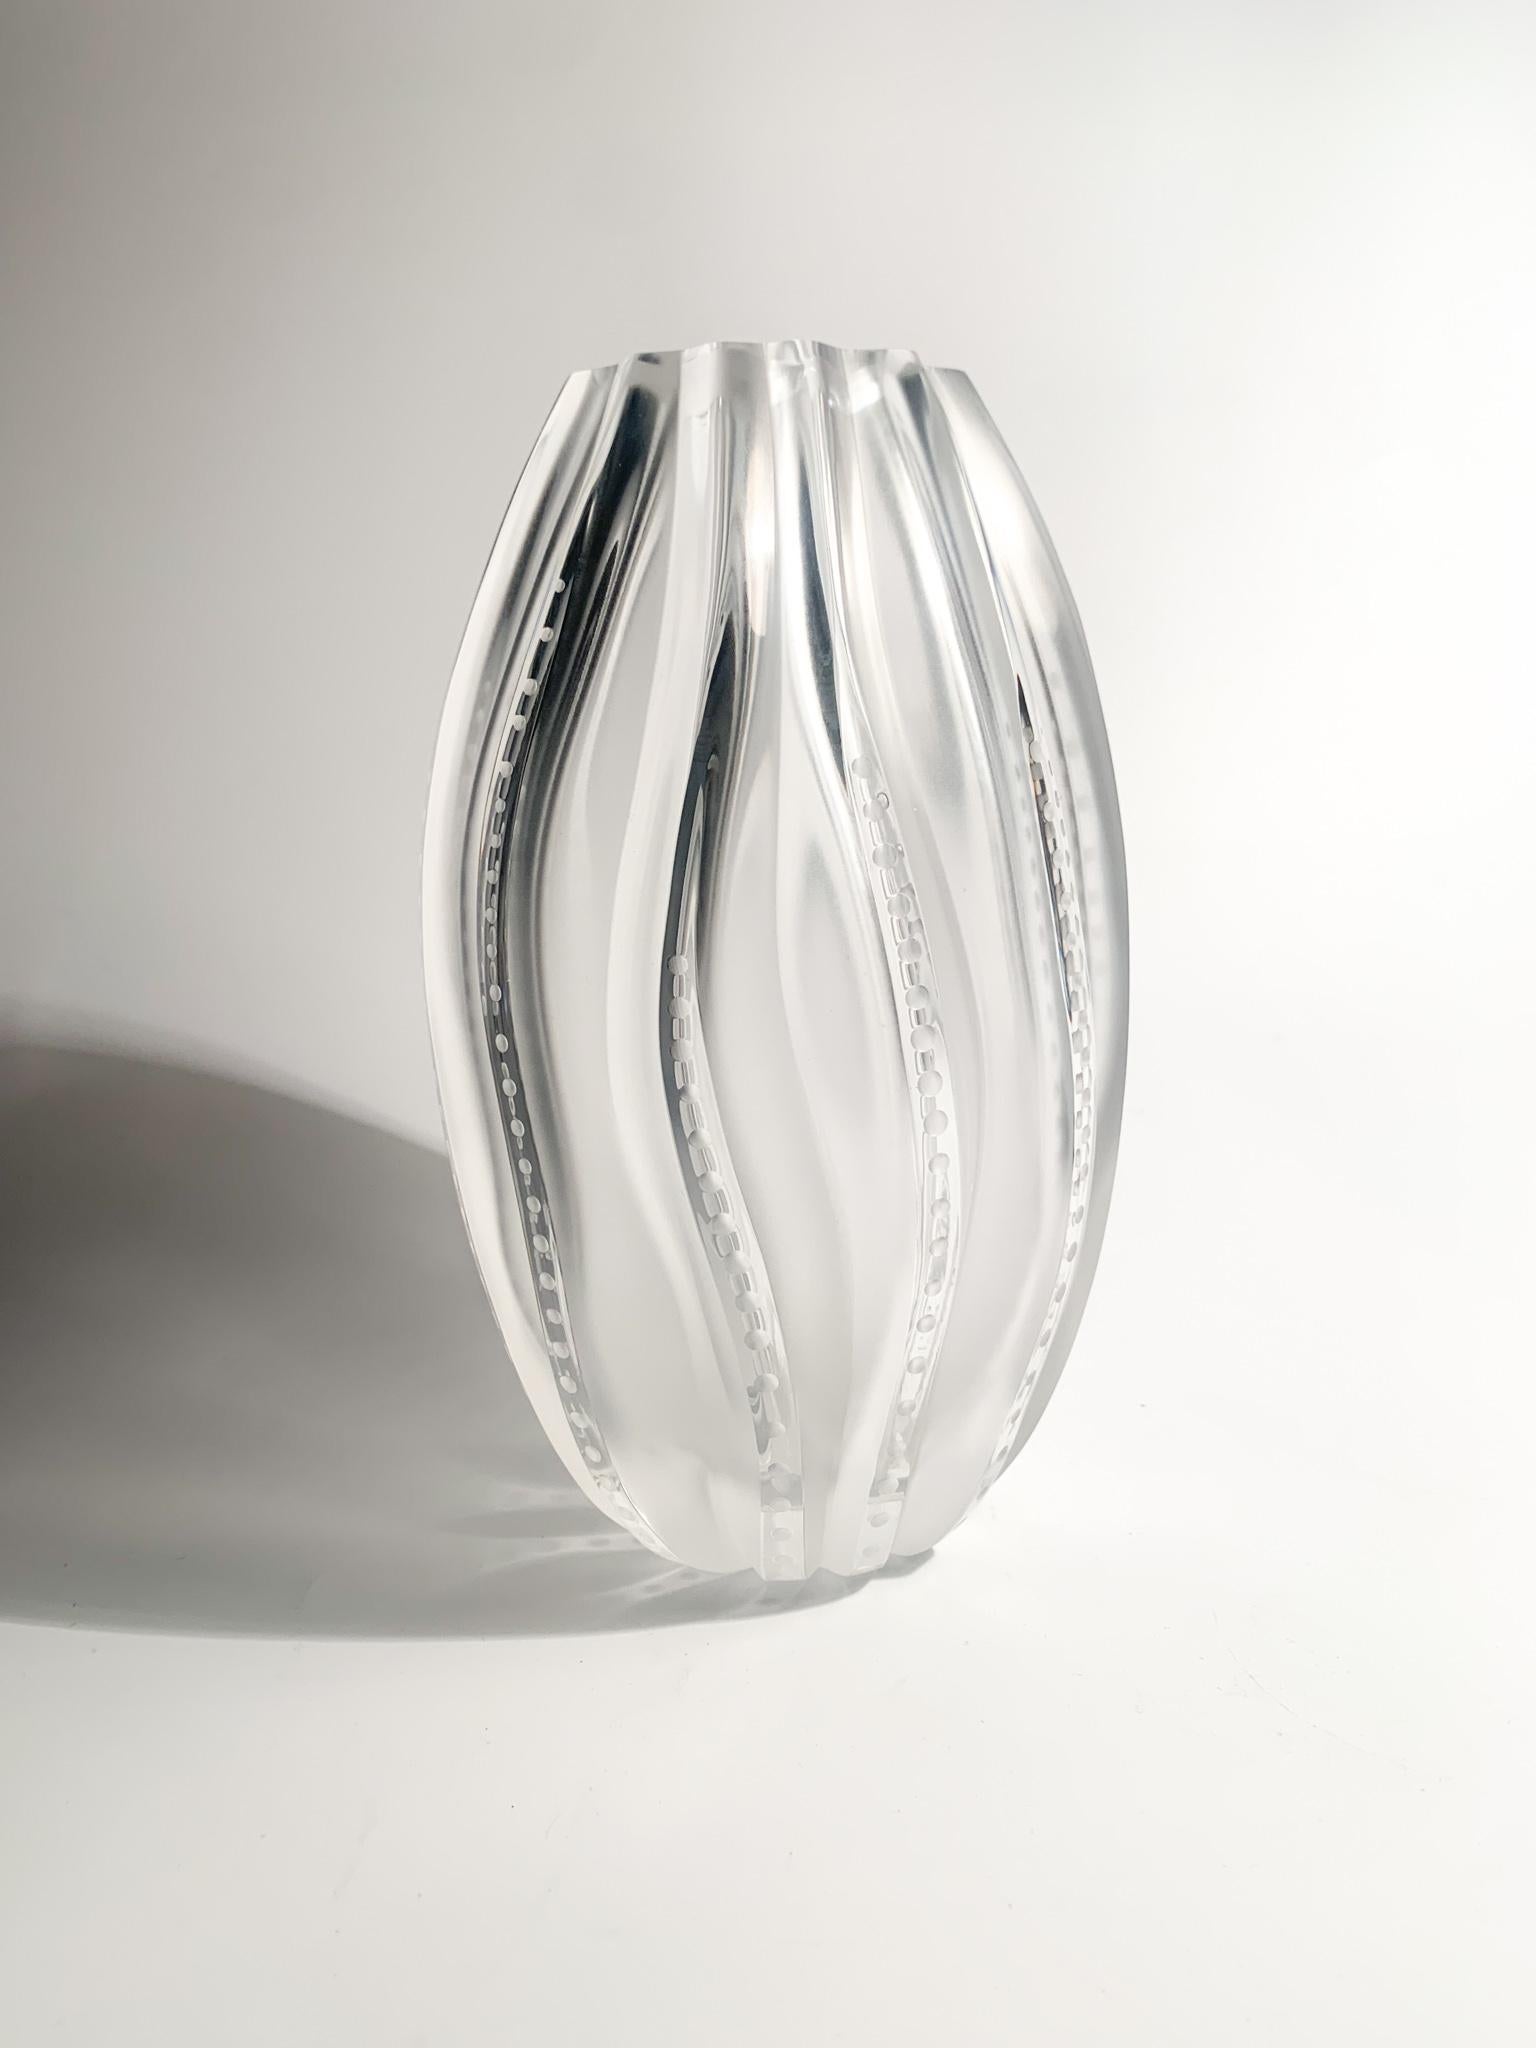 Crystal vase by Lalique, Medusa model, made in the 1970s

Ø cm 11 h cm 18

I Lalique crystals born from the idea of René Lalique, a French jeweler and glassmaker. 

During his career he collaborated with various important brands, such as